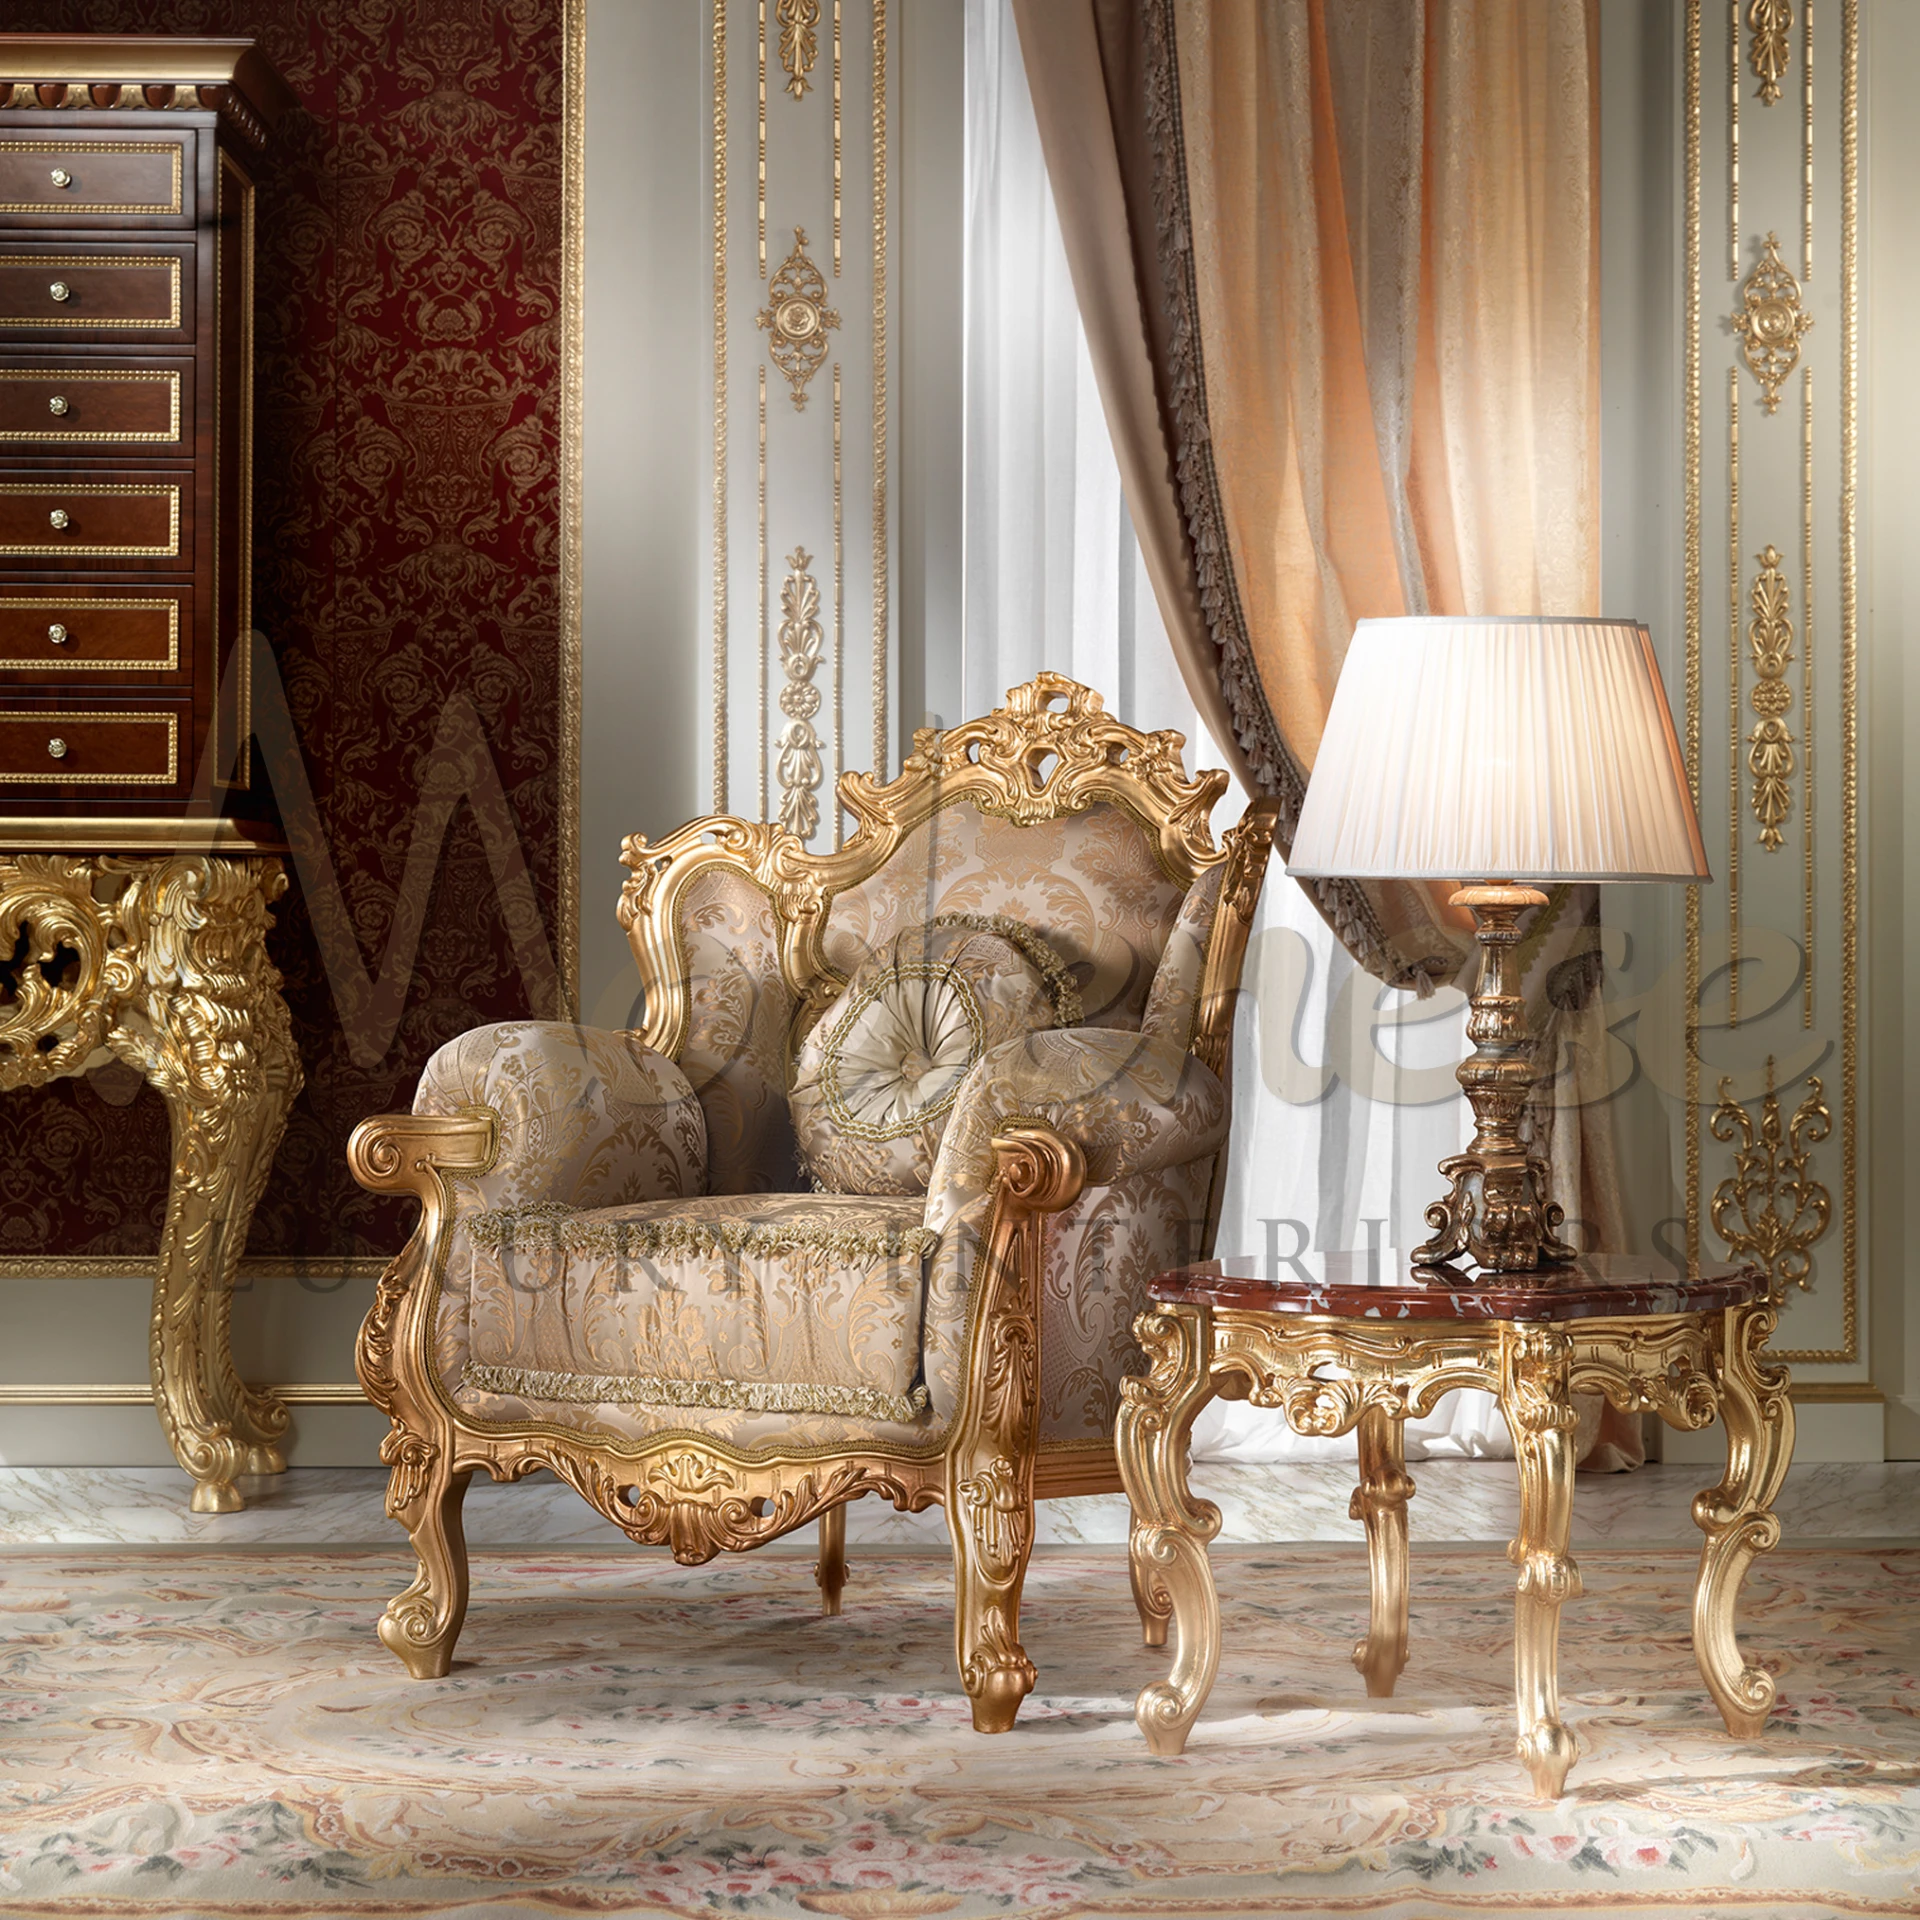 Classical golden armchair with detailed carvings and lavish beige damask seating, epitomizing Rococo luxury.